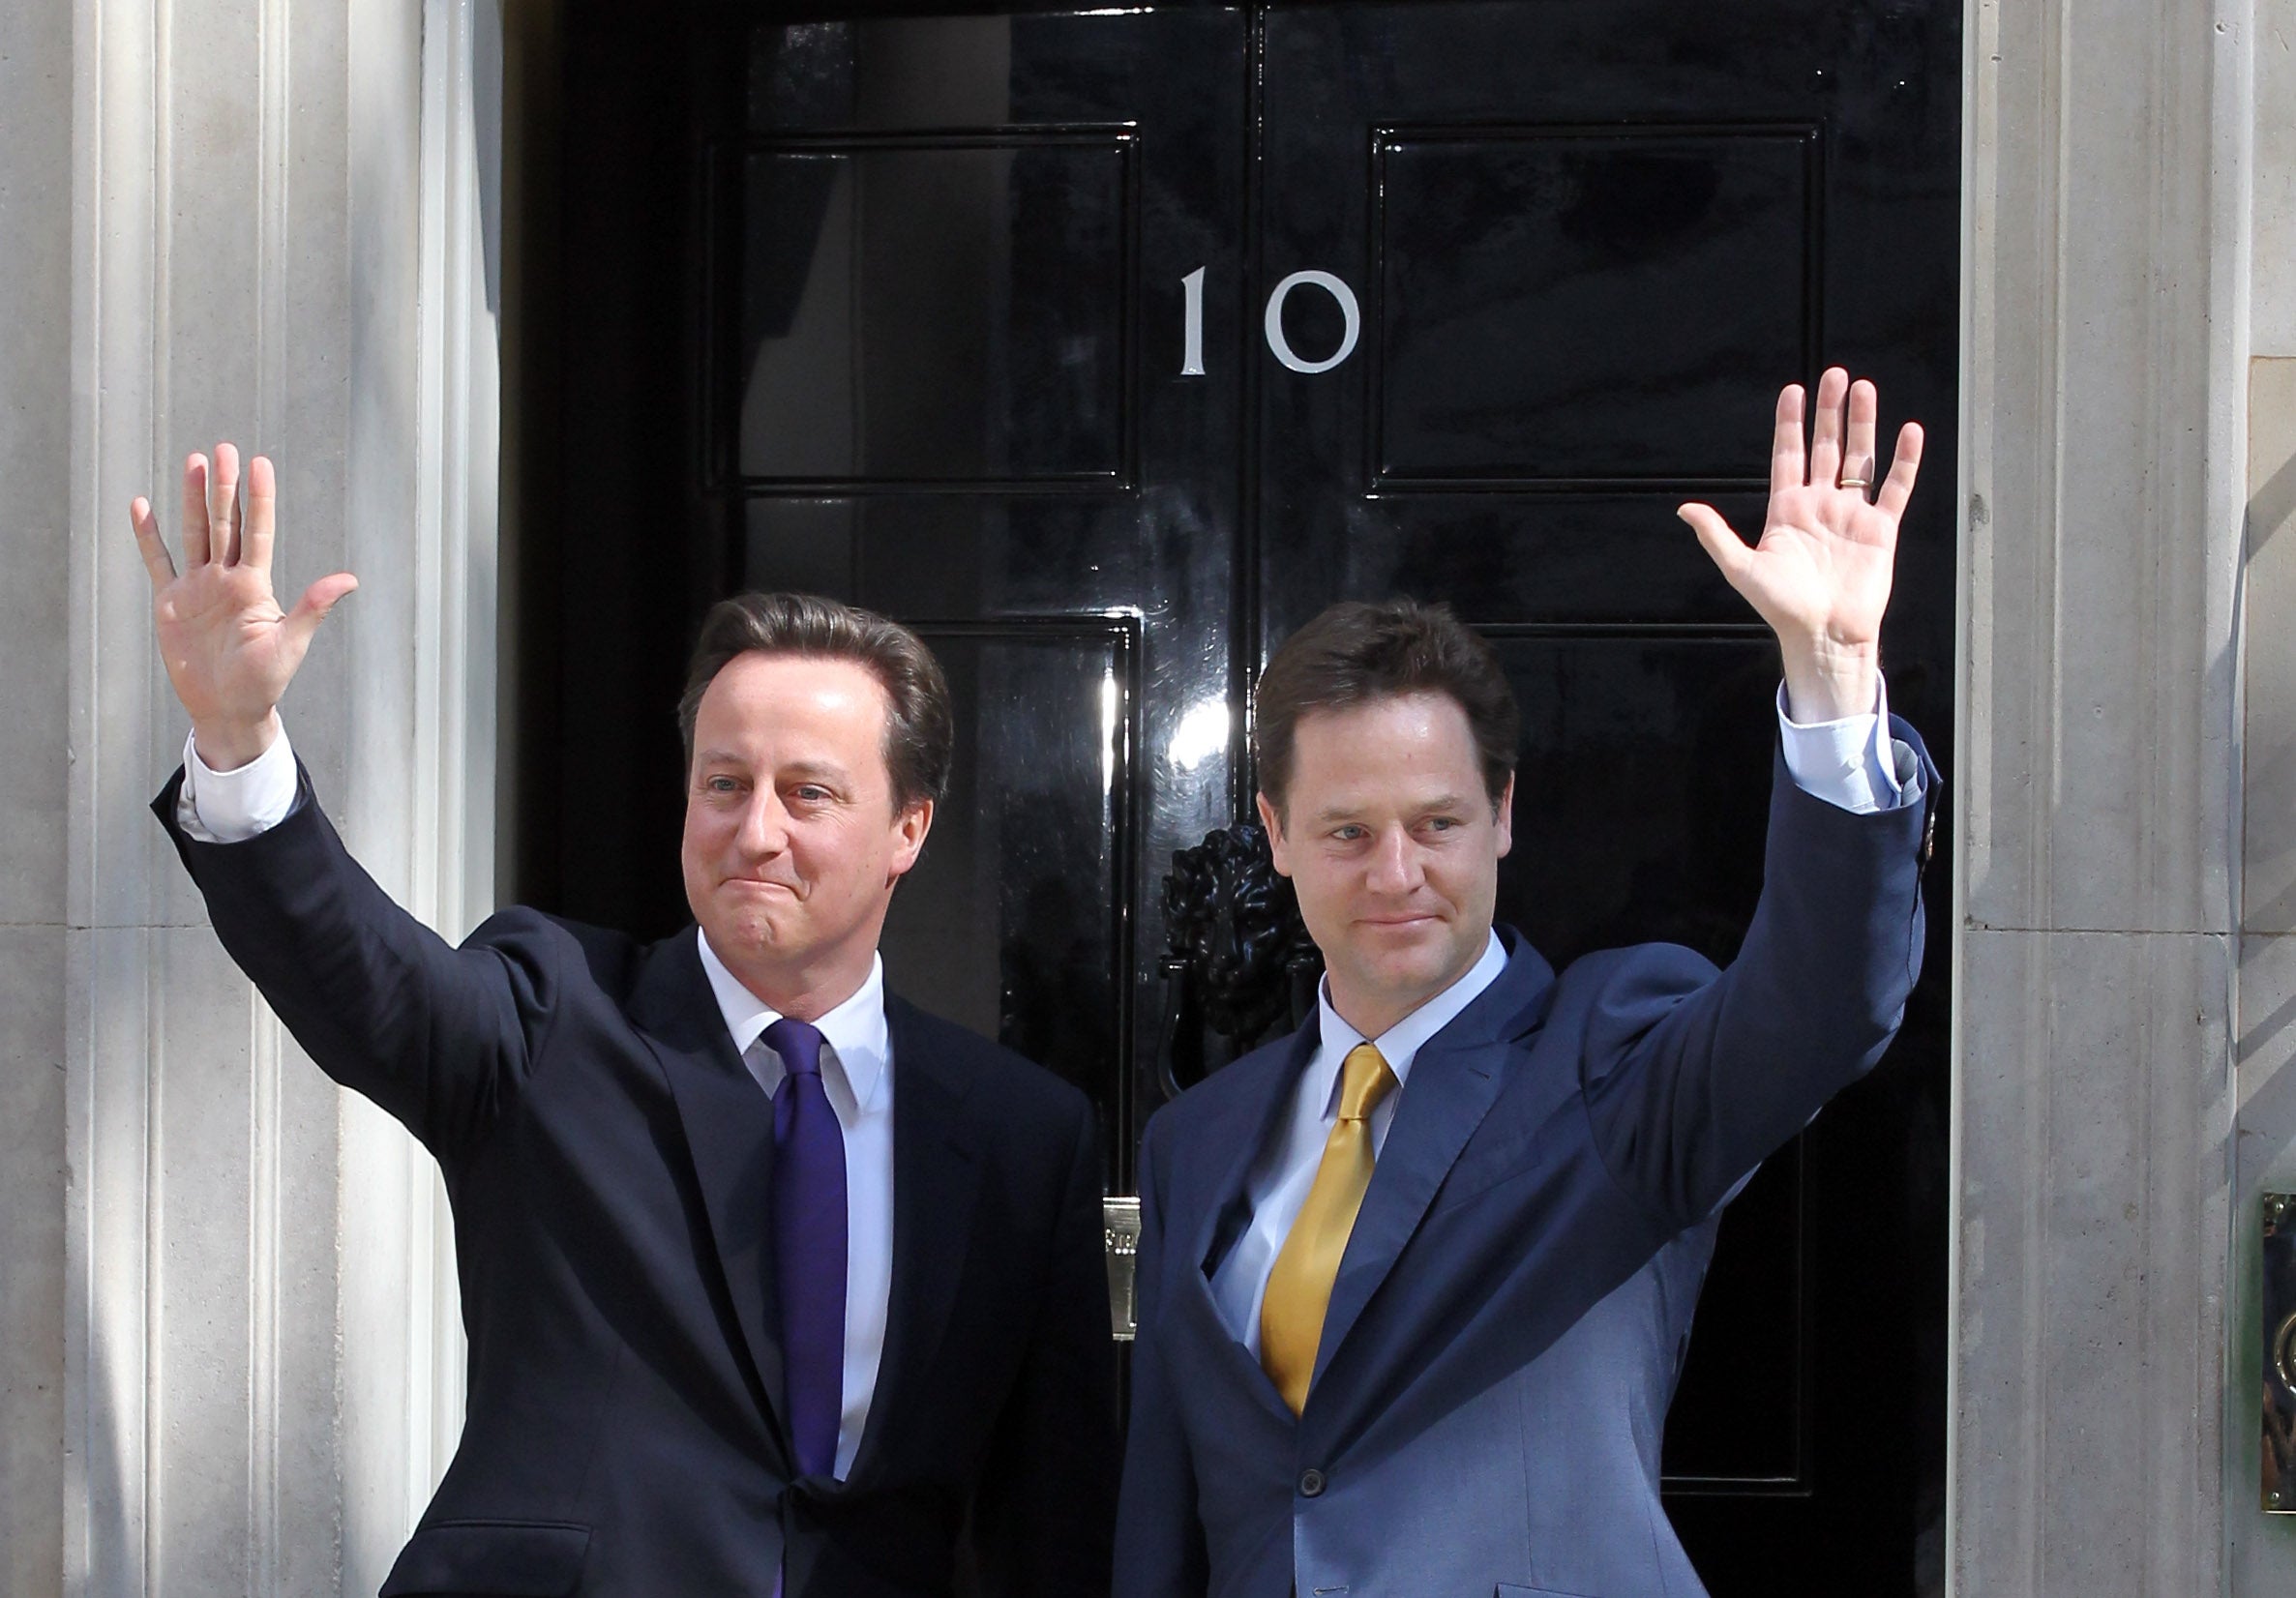 The coalition: David Cameron welcomes his new deputy, Nick Clegg, the Liberal Democrat, in 2010